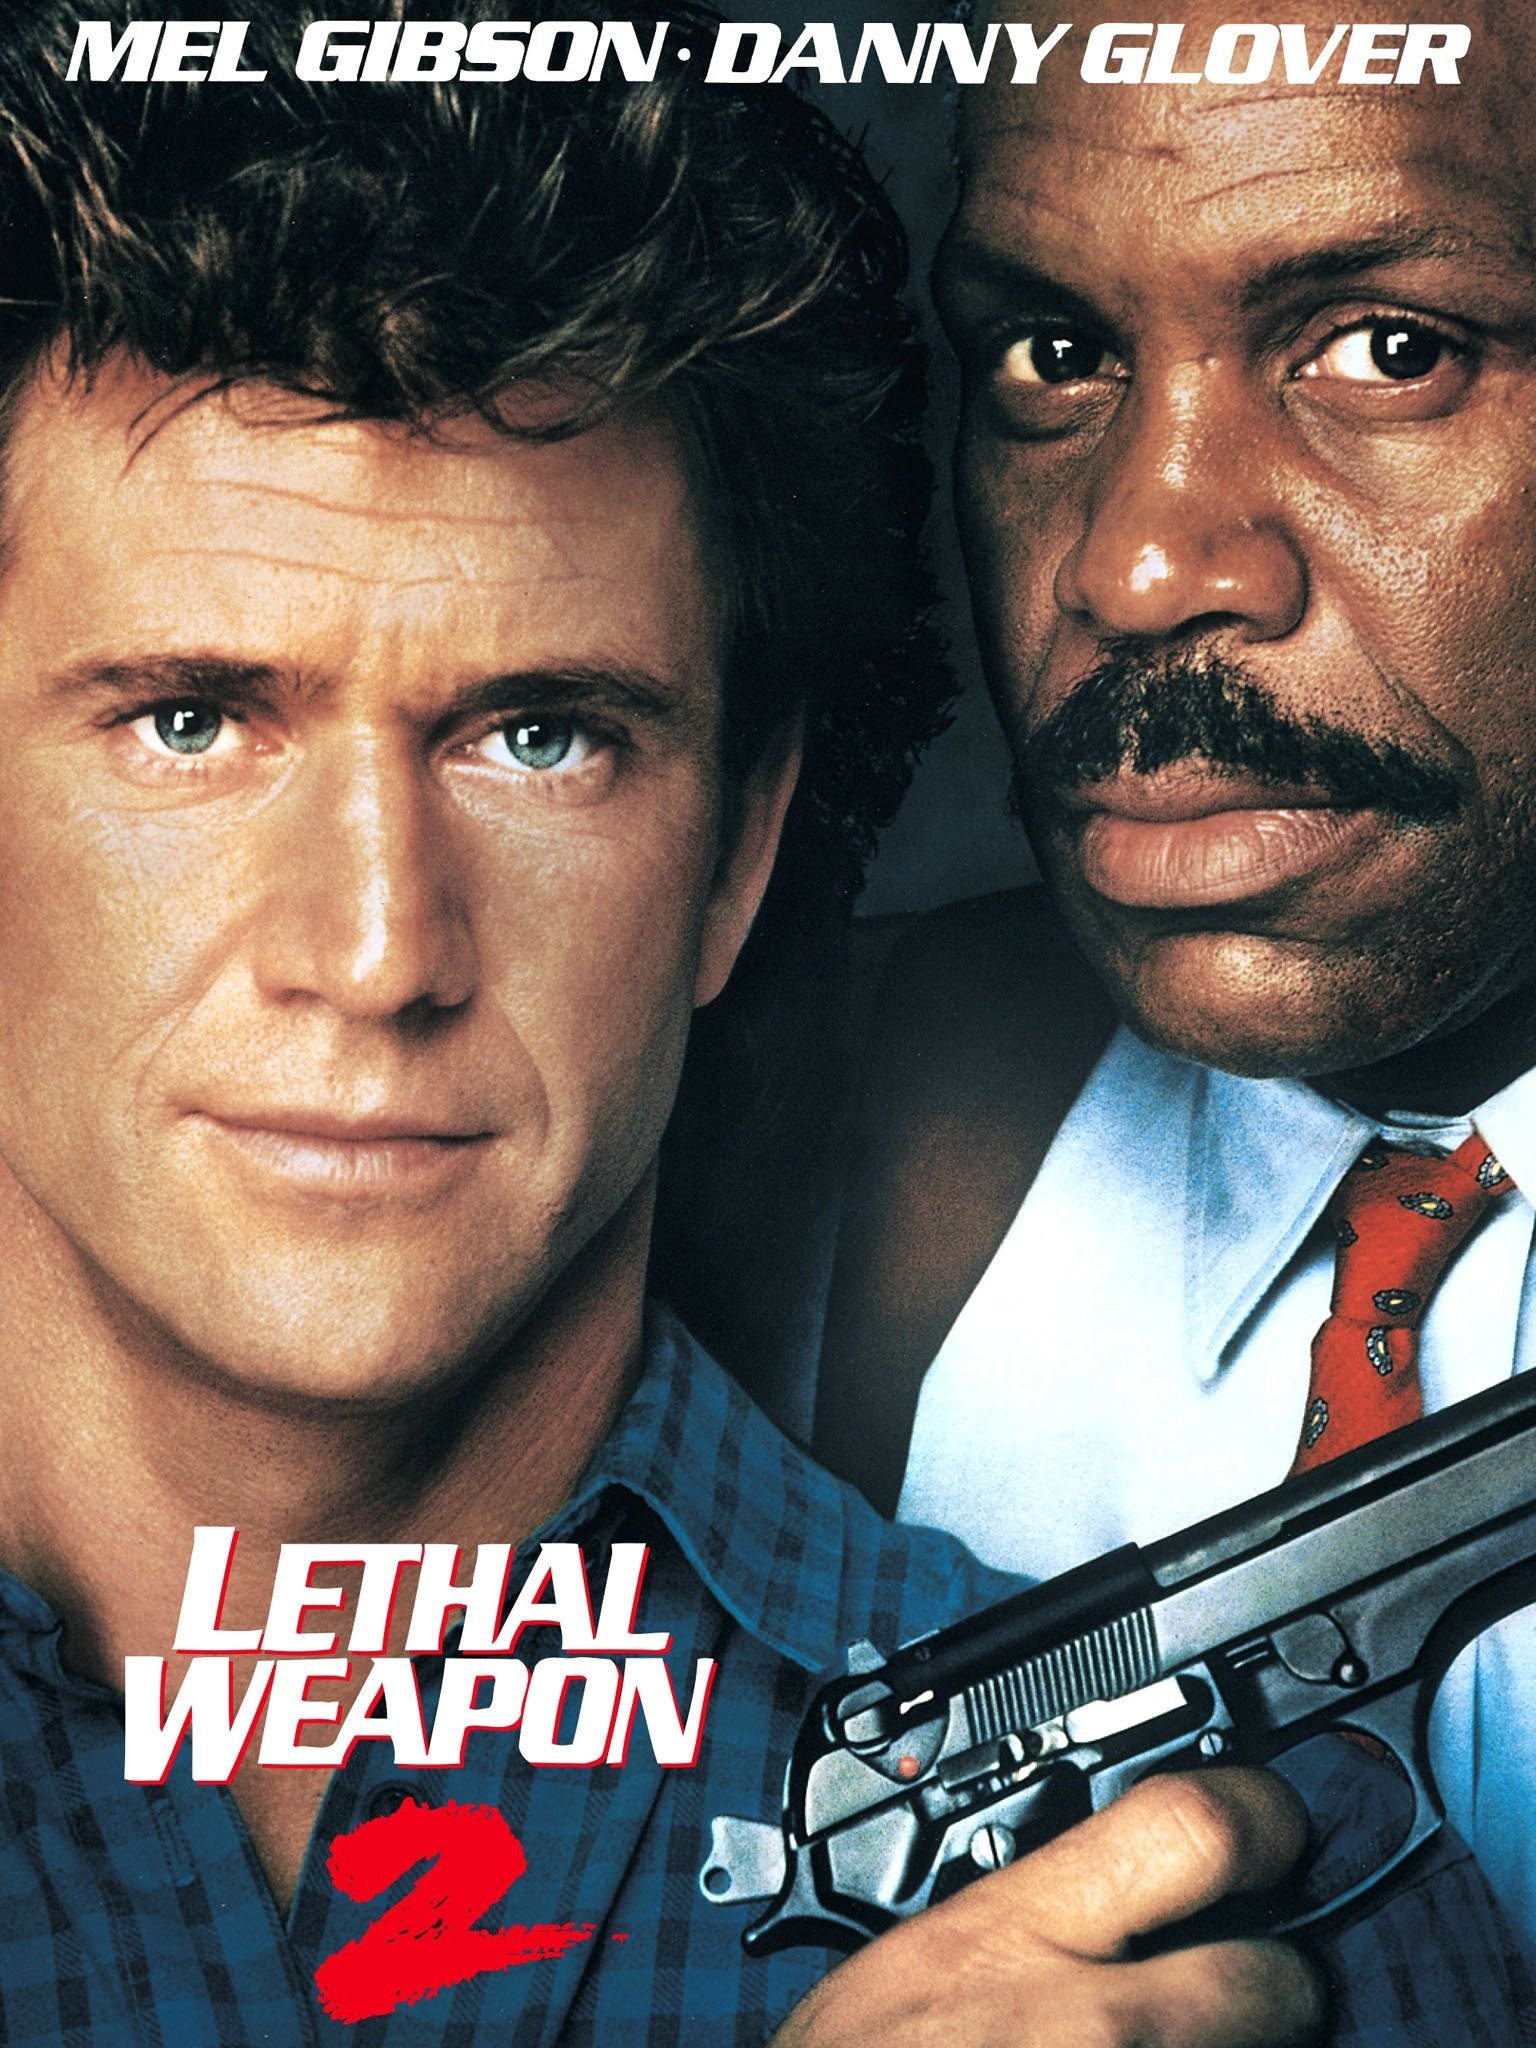 Sure-Loc Presents the Lethal Weapon Red